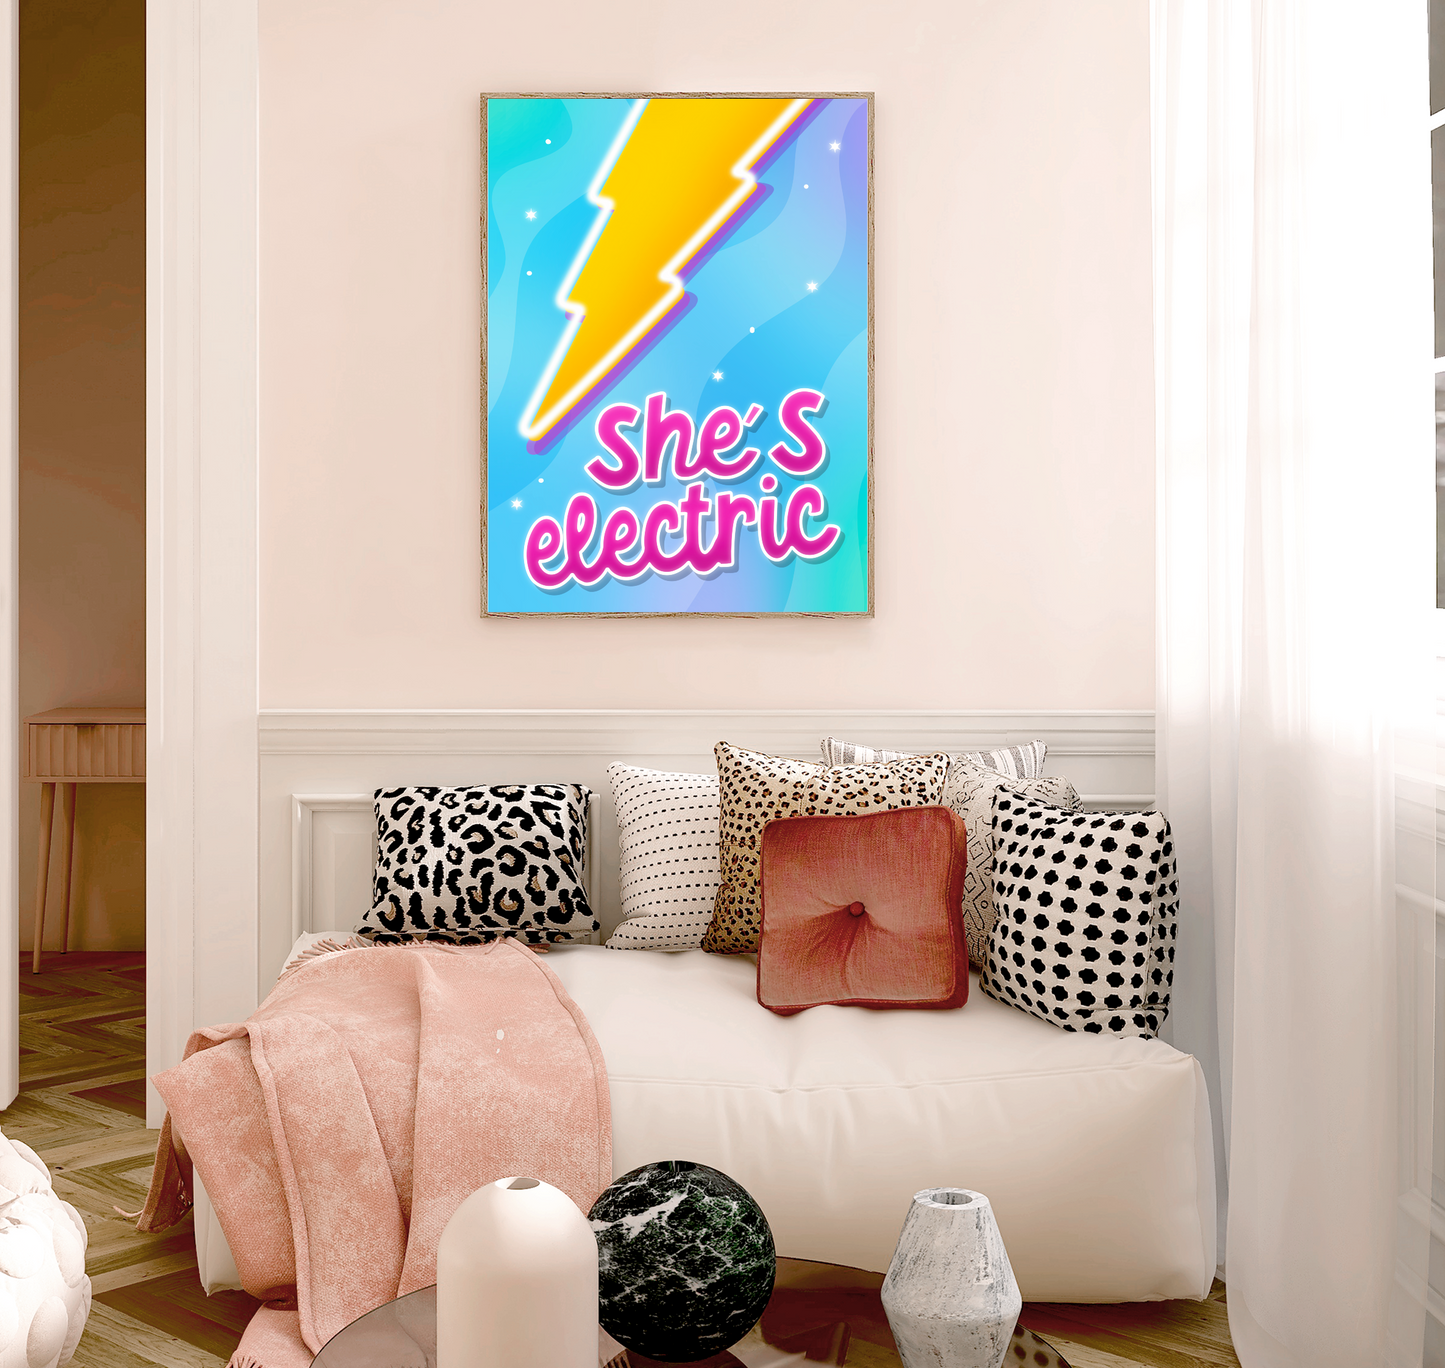 "A burst of energy in a print - lightning bolt illustration with 'she's electric' quote in vivid pink, perfect for home or gifting."